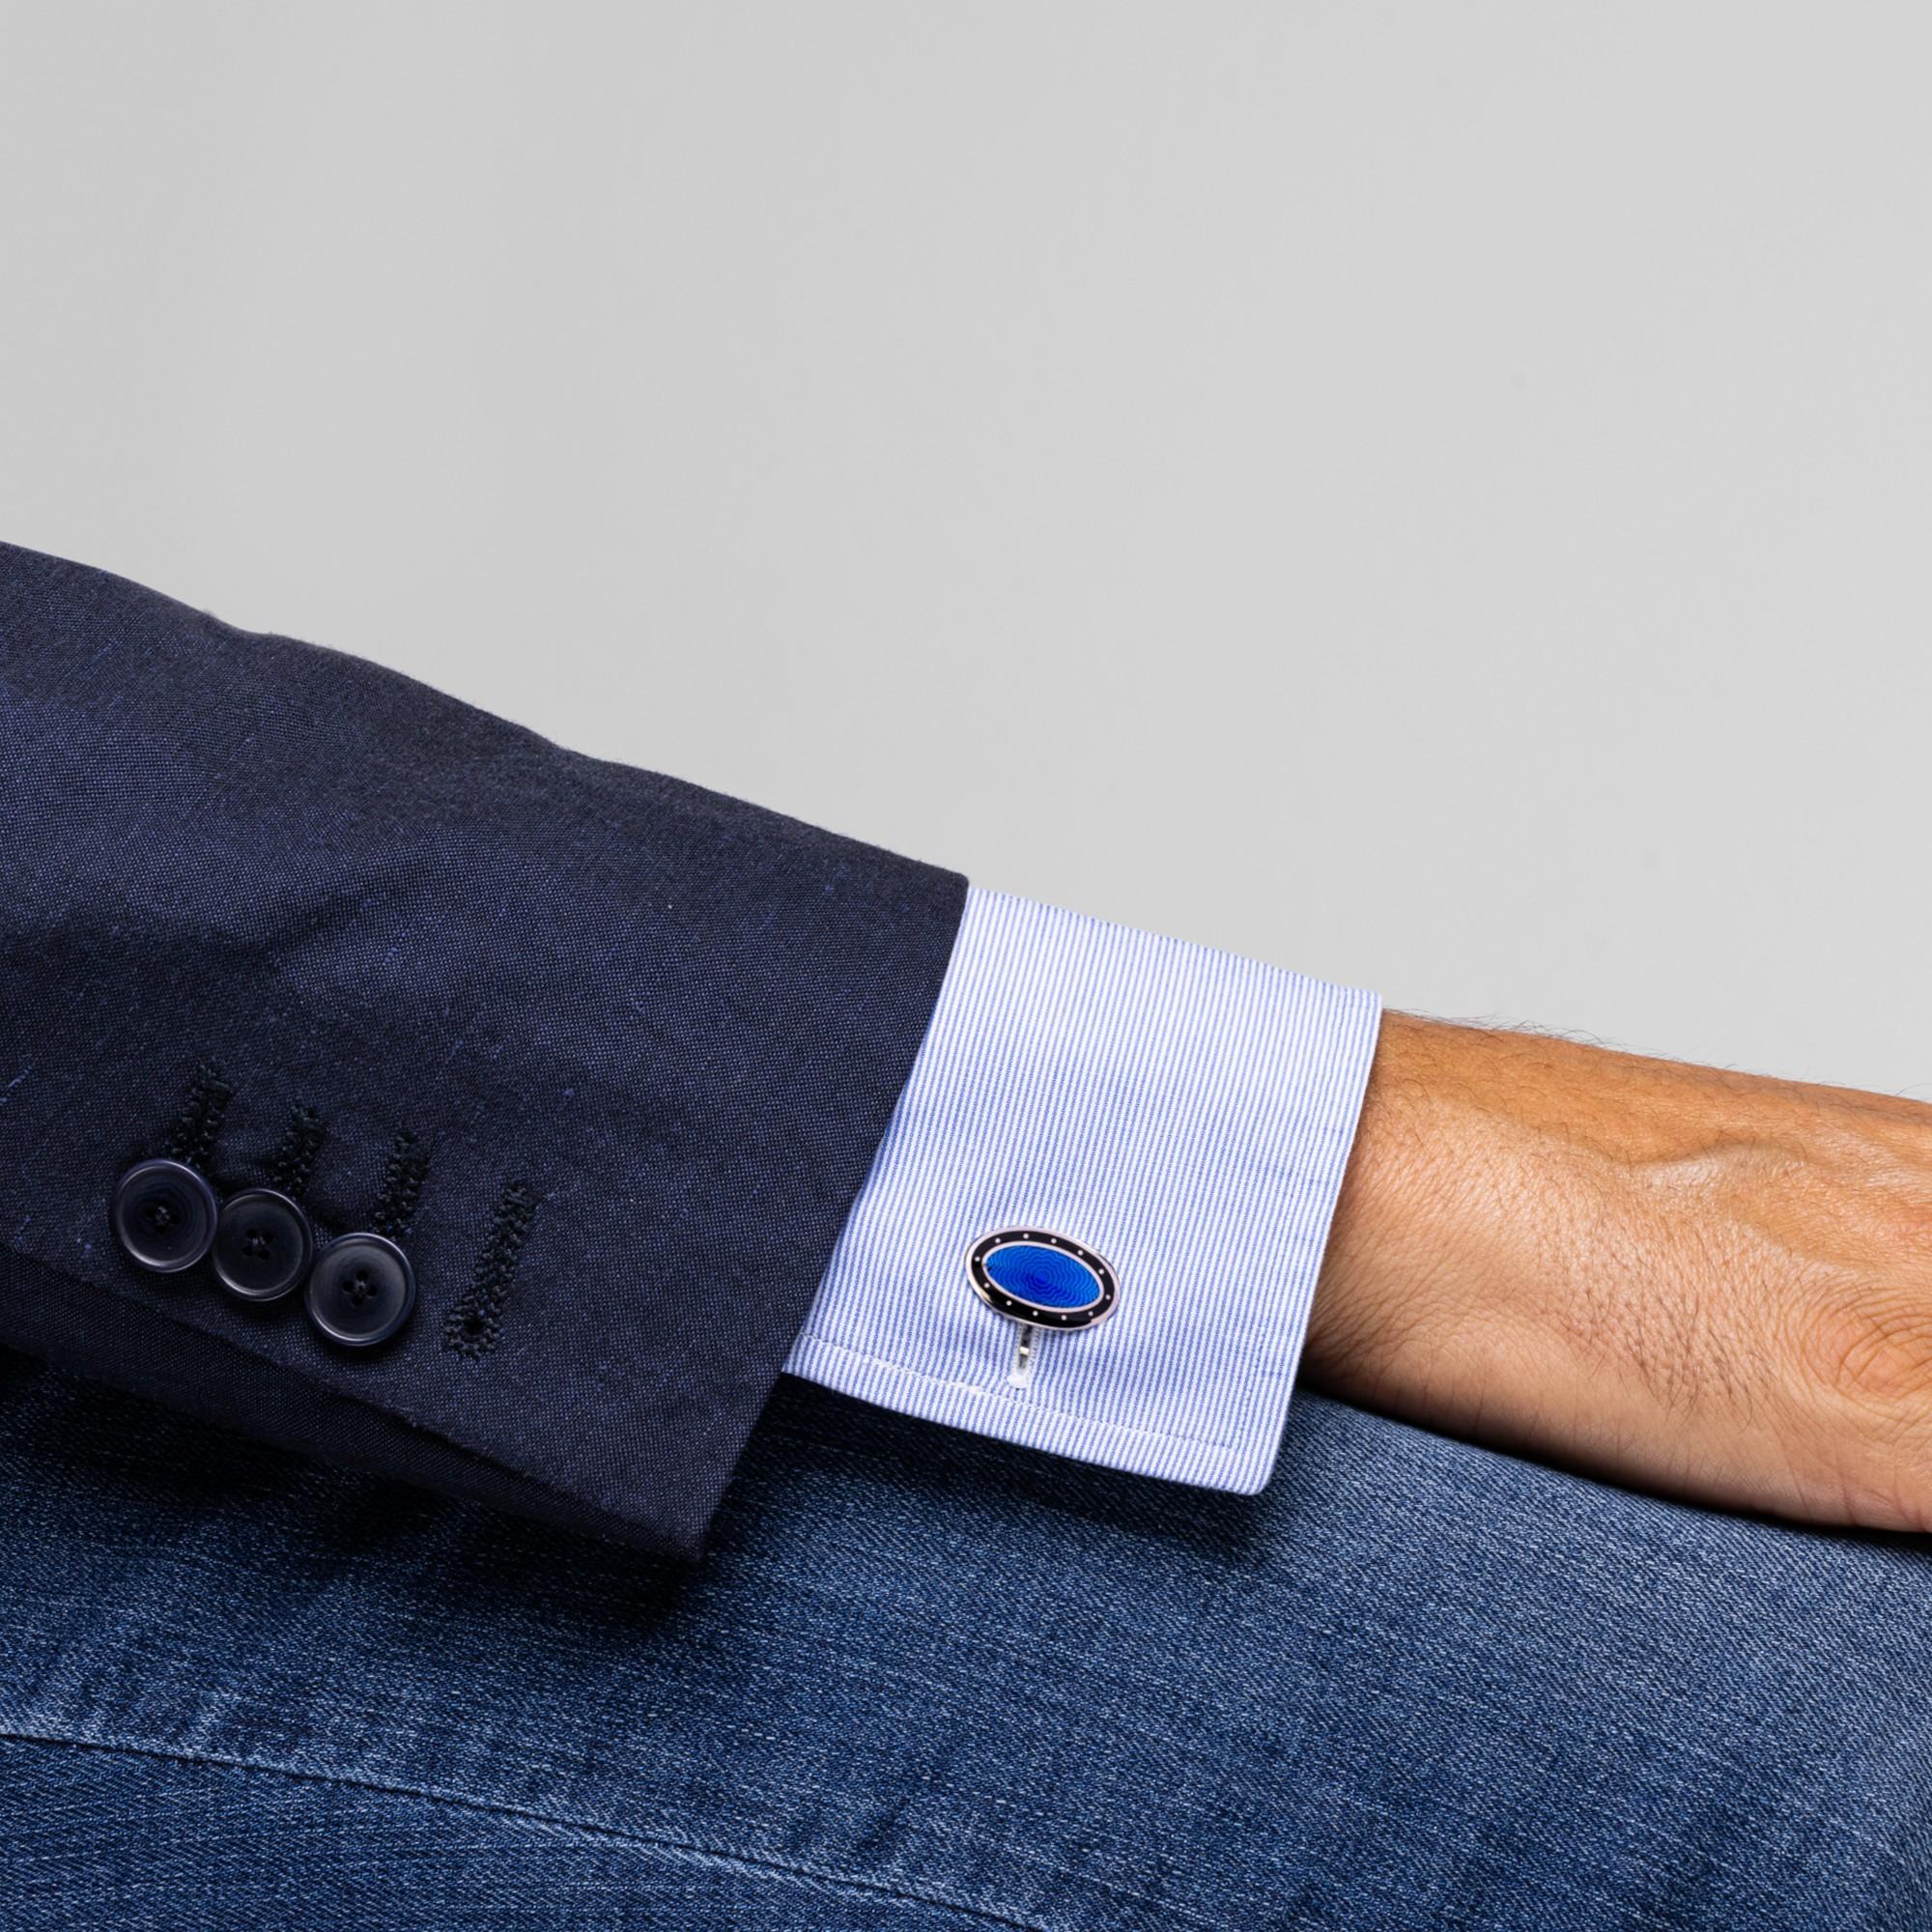 Alex Jona design collection, hand crafted in Italy, rhodium plated oval sterling silver cufflinks with blu and black enamel. These cufflinks feature a T-Bar fastening, aiding in easy use and confidence that they'll stay secured to your shirt. Marked